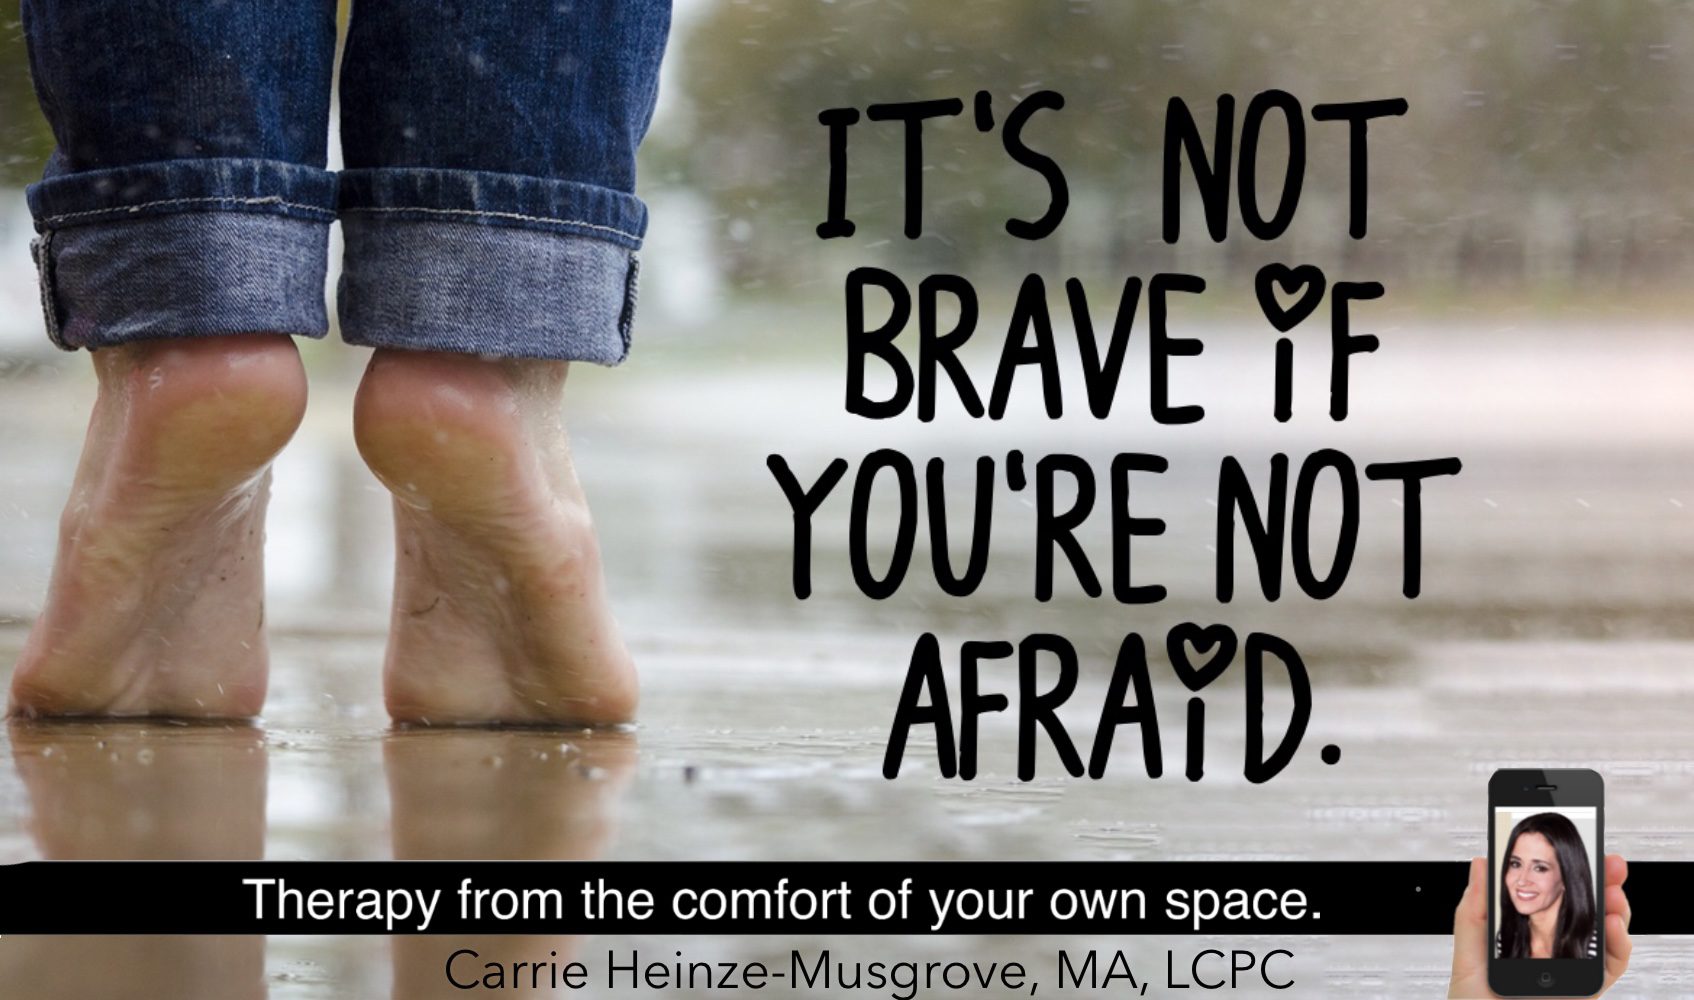 It’s not brave if you’re not afraid.